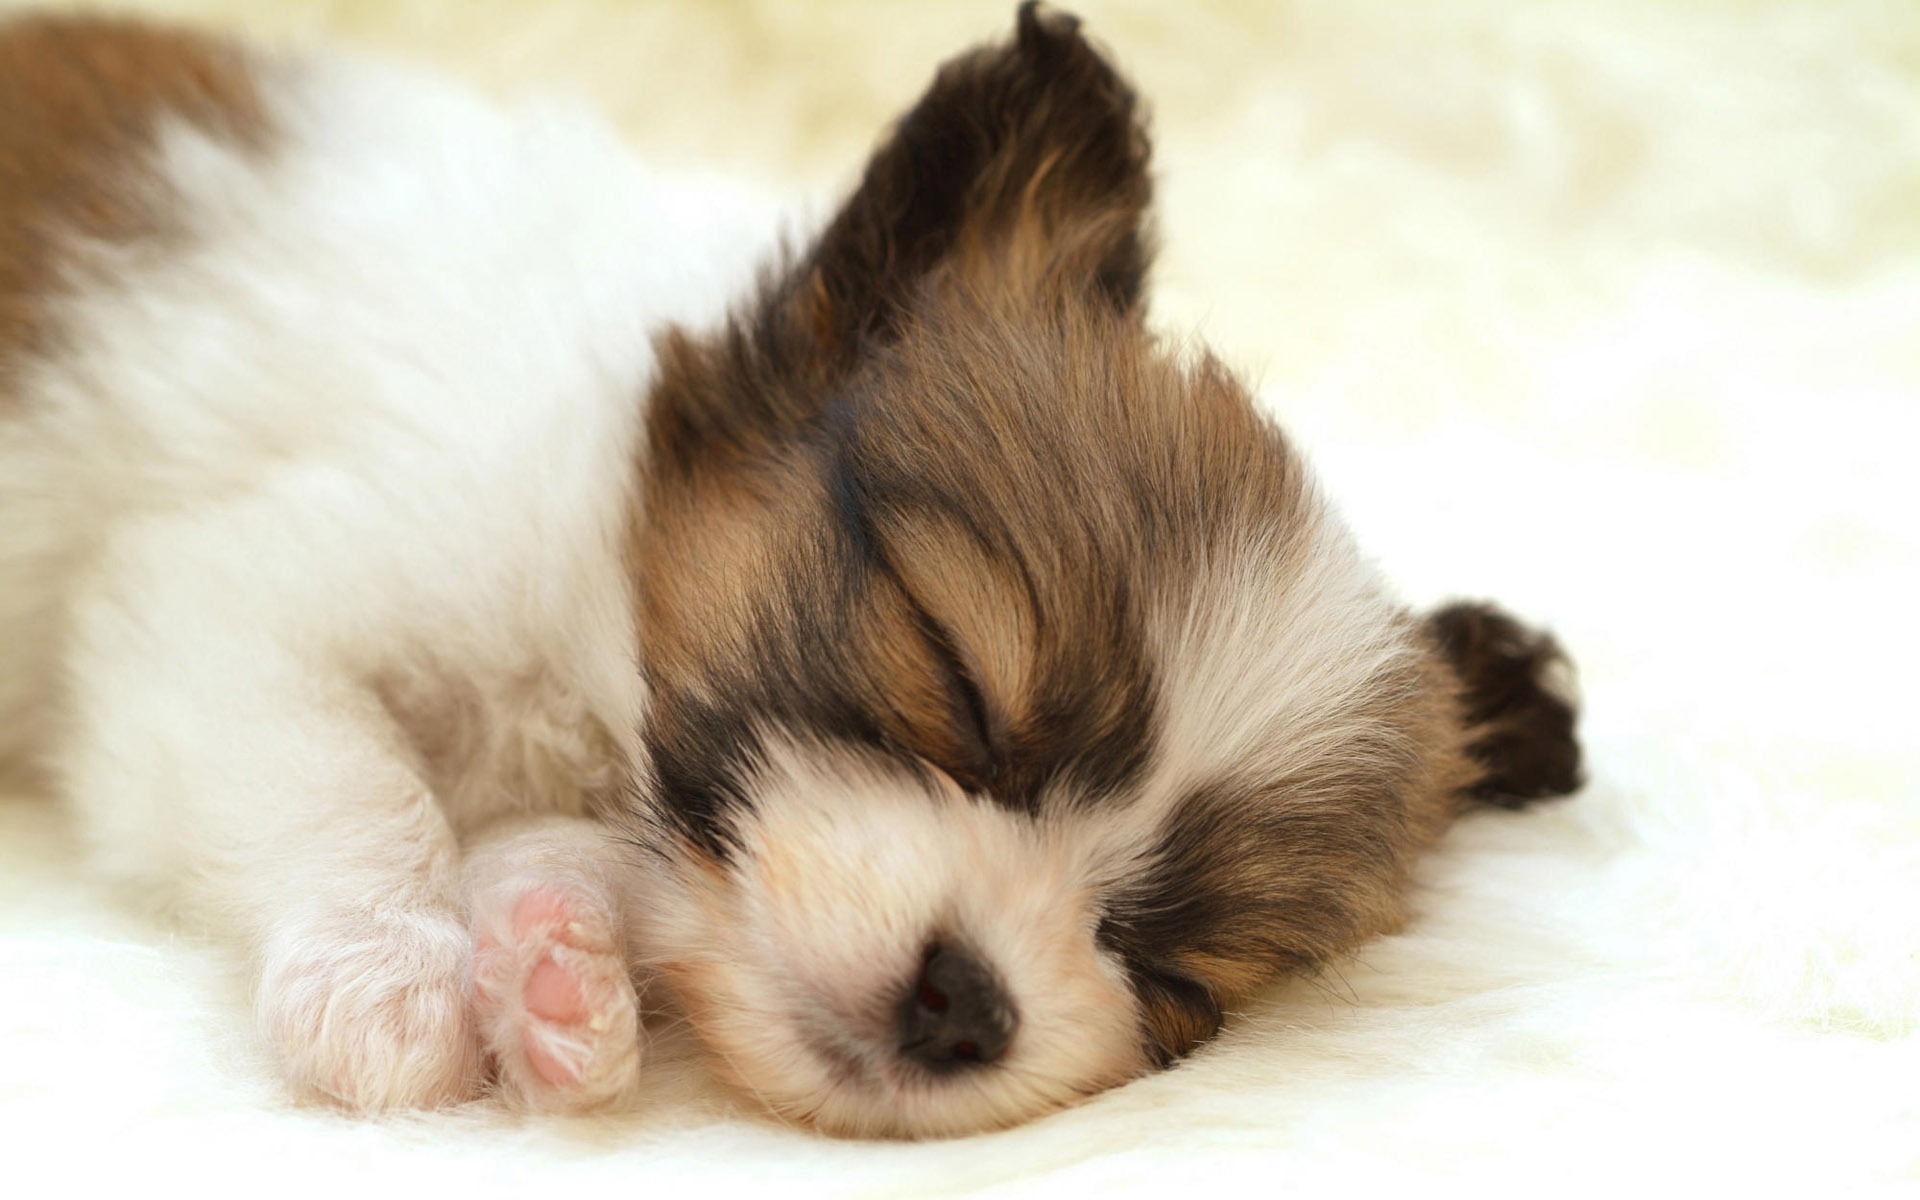 Puppy Photo HD wallpapers (10) #10 - 1920x1200